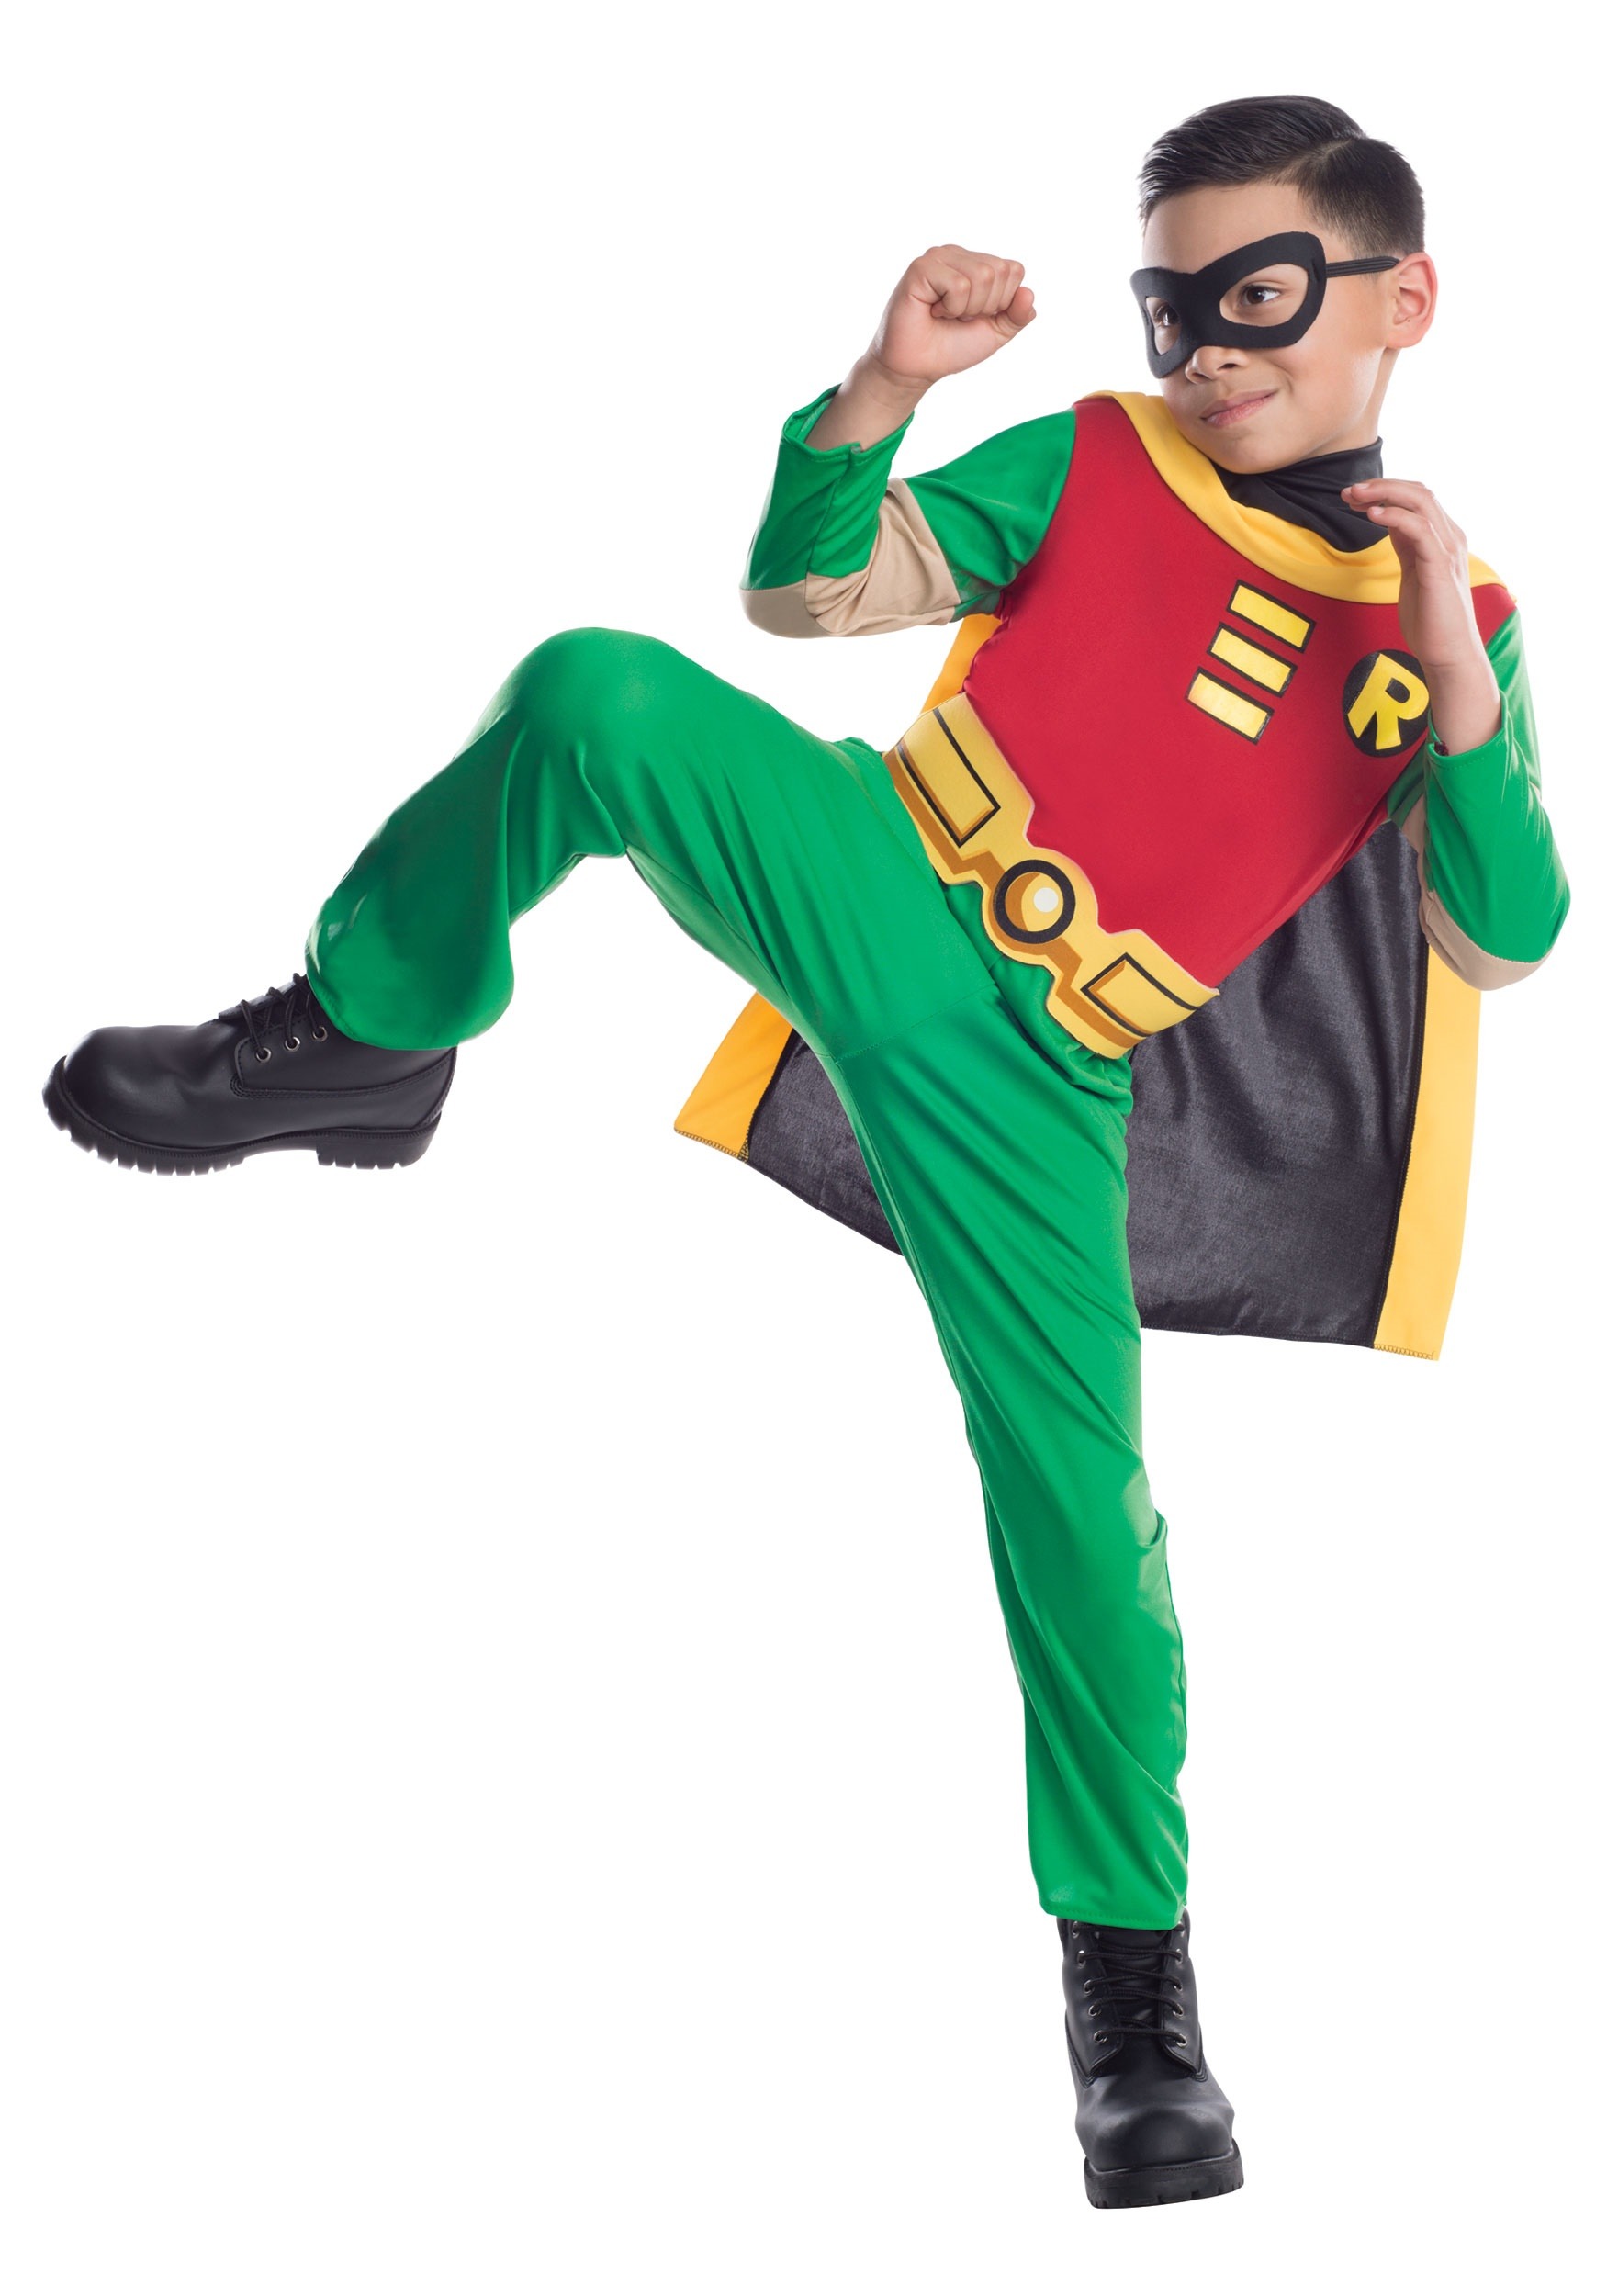 NWT TEEN TITANS GO ROBIN HALLOWEEN COSTUME OUTFIT COMPLETE CHILD MEDIUM